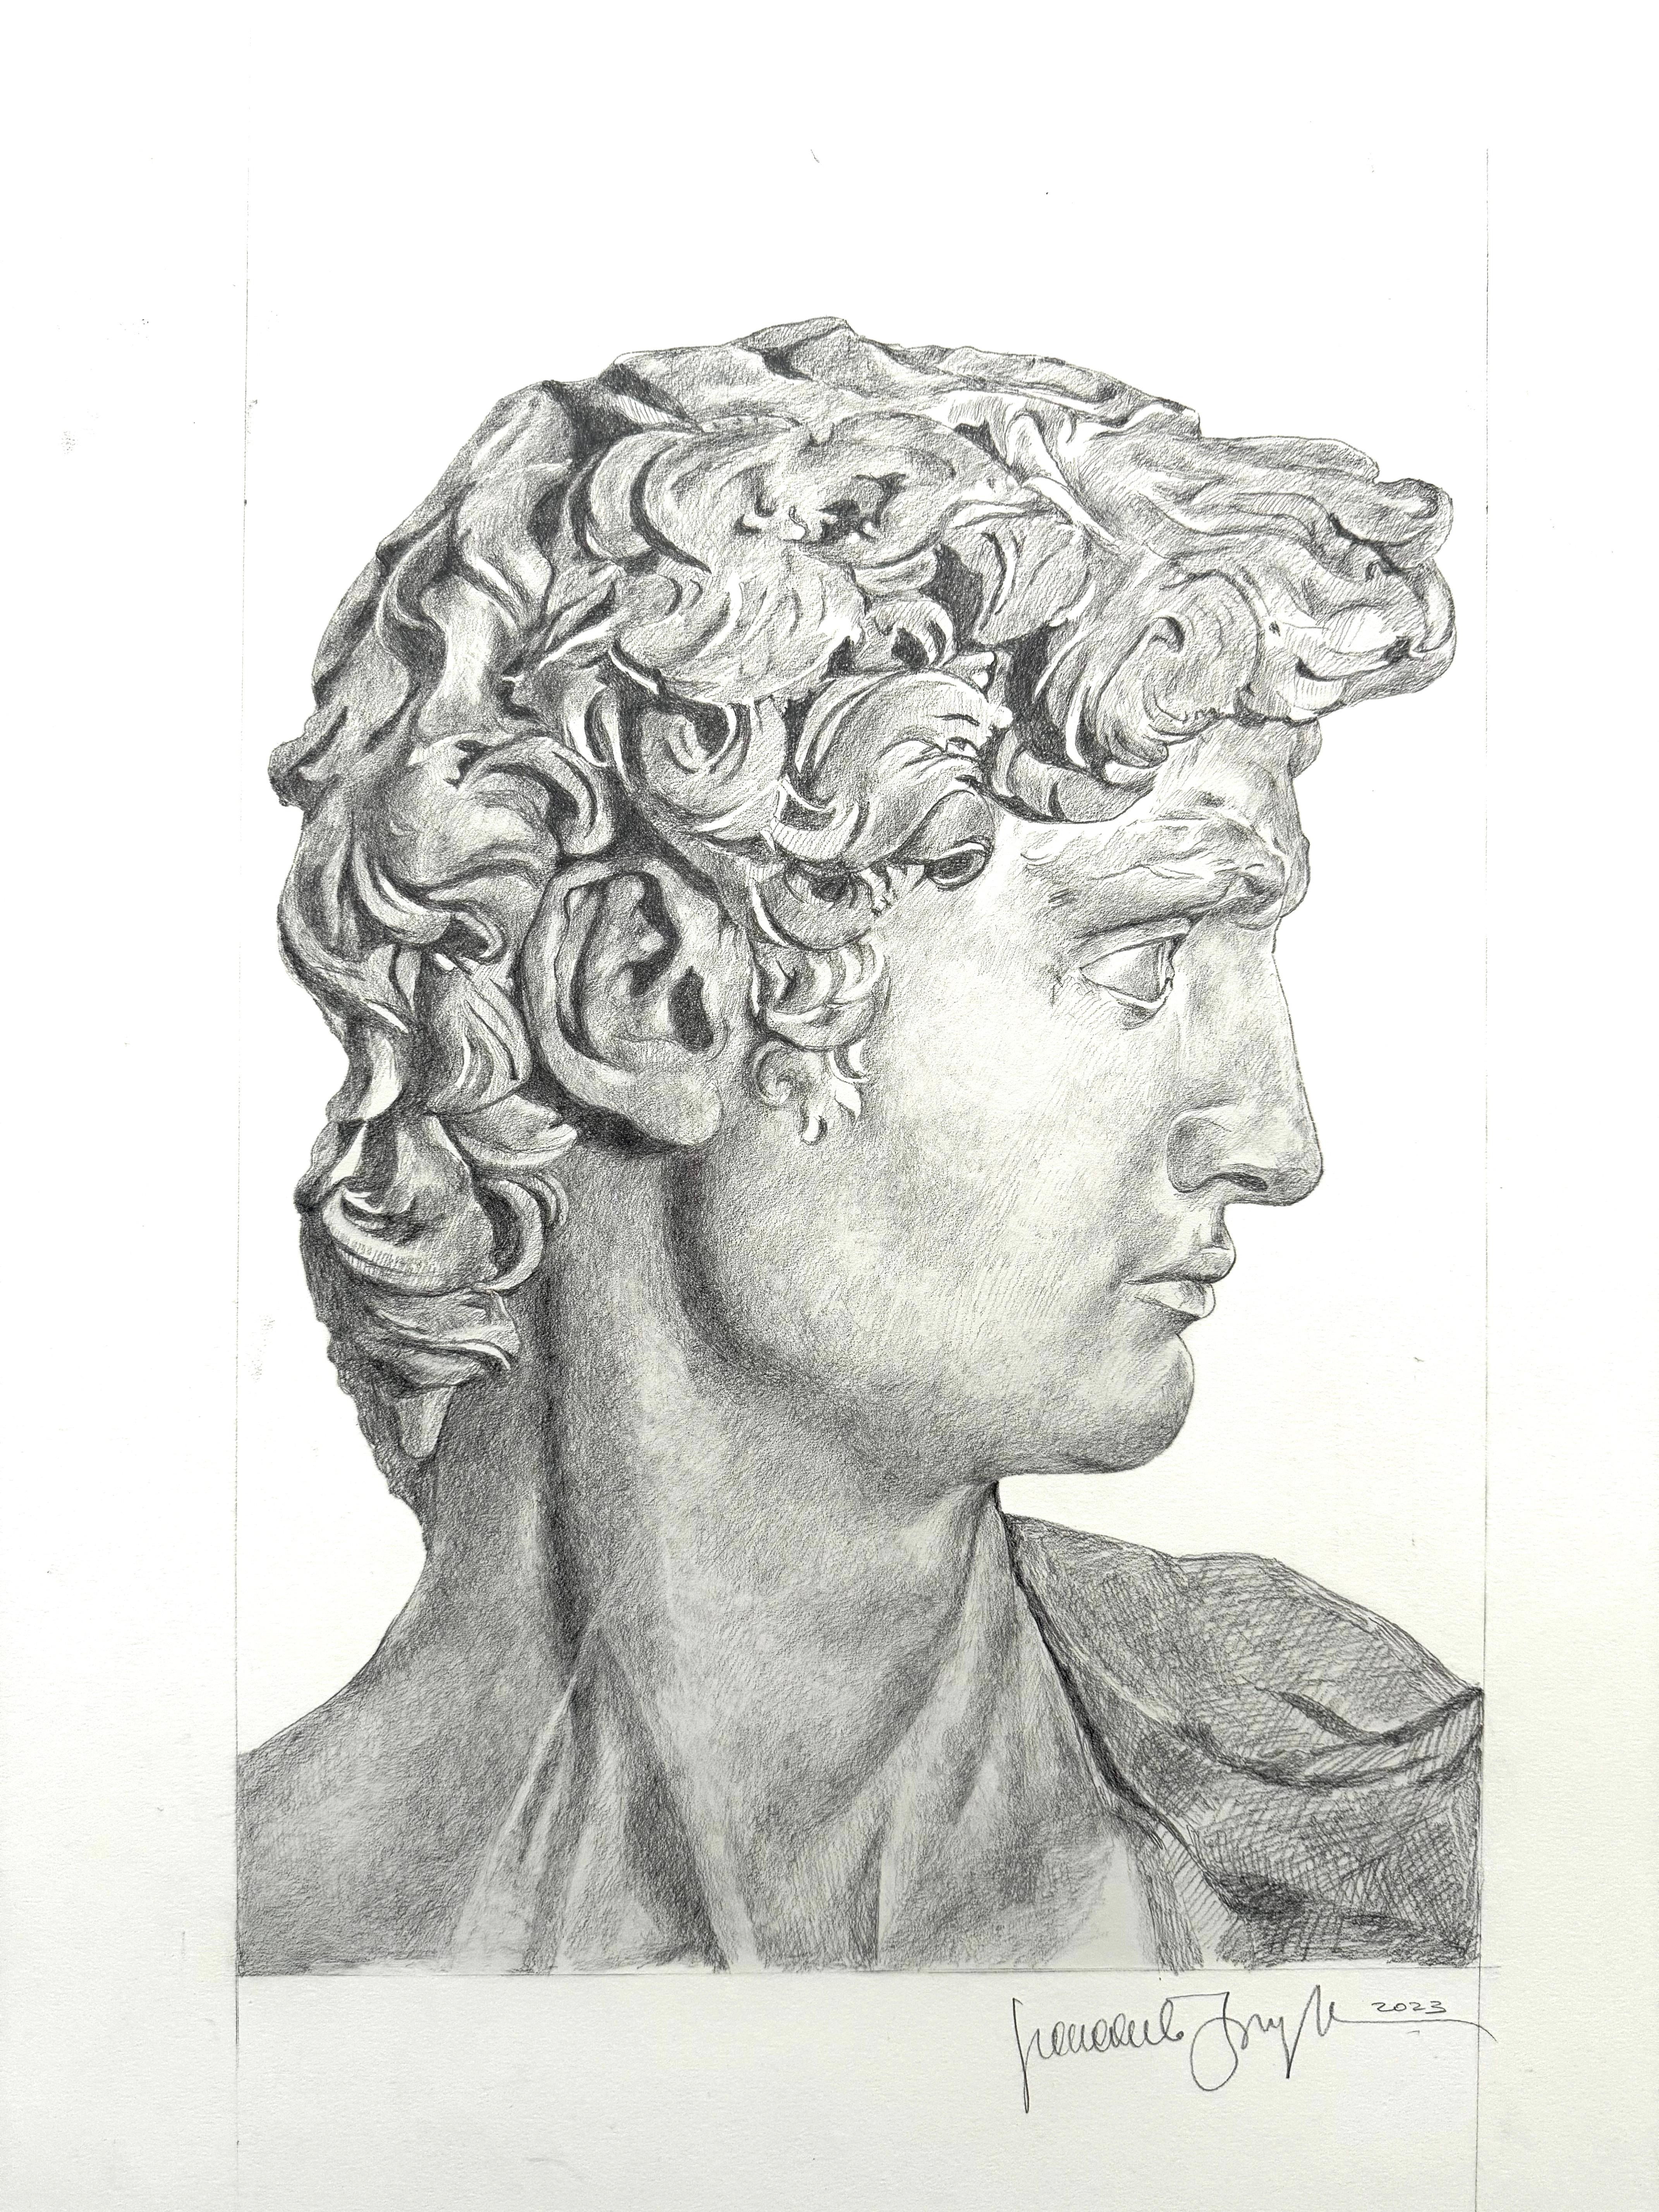 Incredible sketch of Michelangelo's David - Art by Giancarlo Impiglia